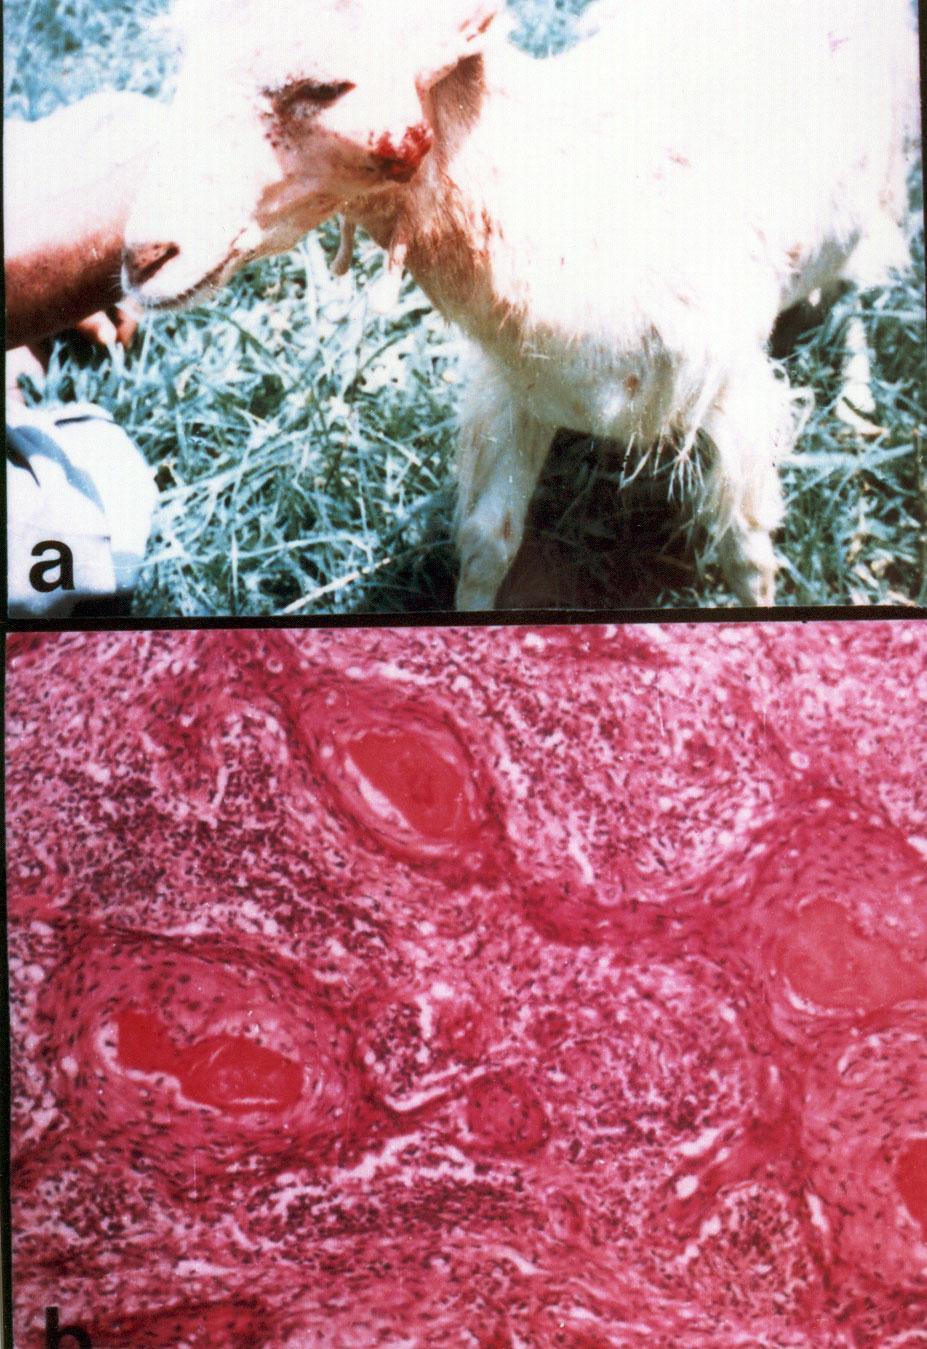 a (a) Squamous cell carcinoma under the base